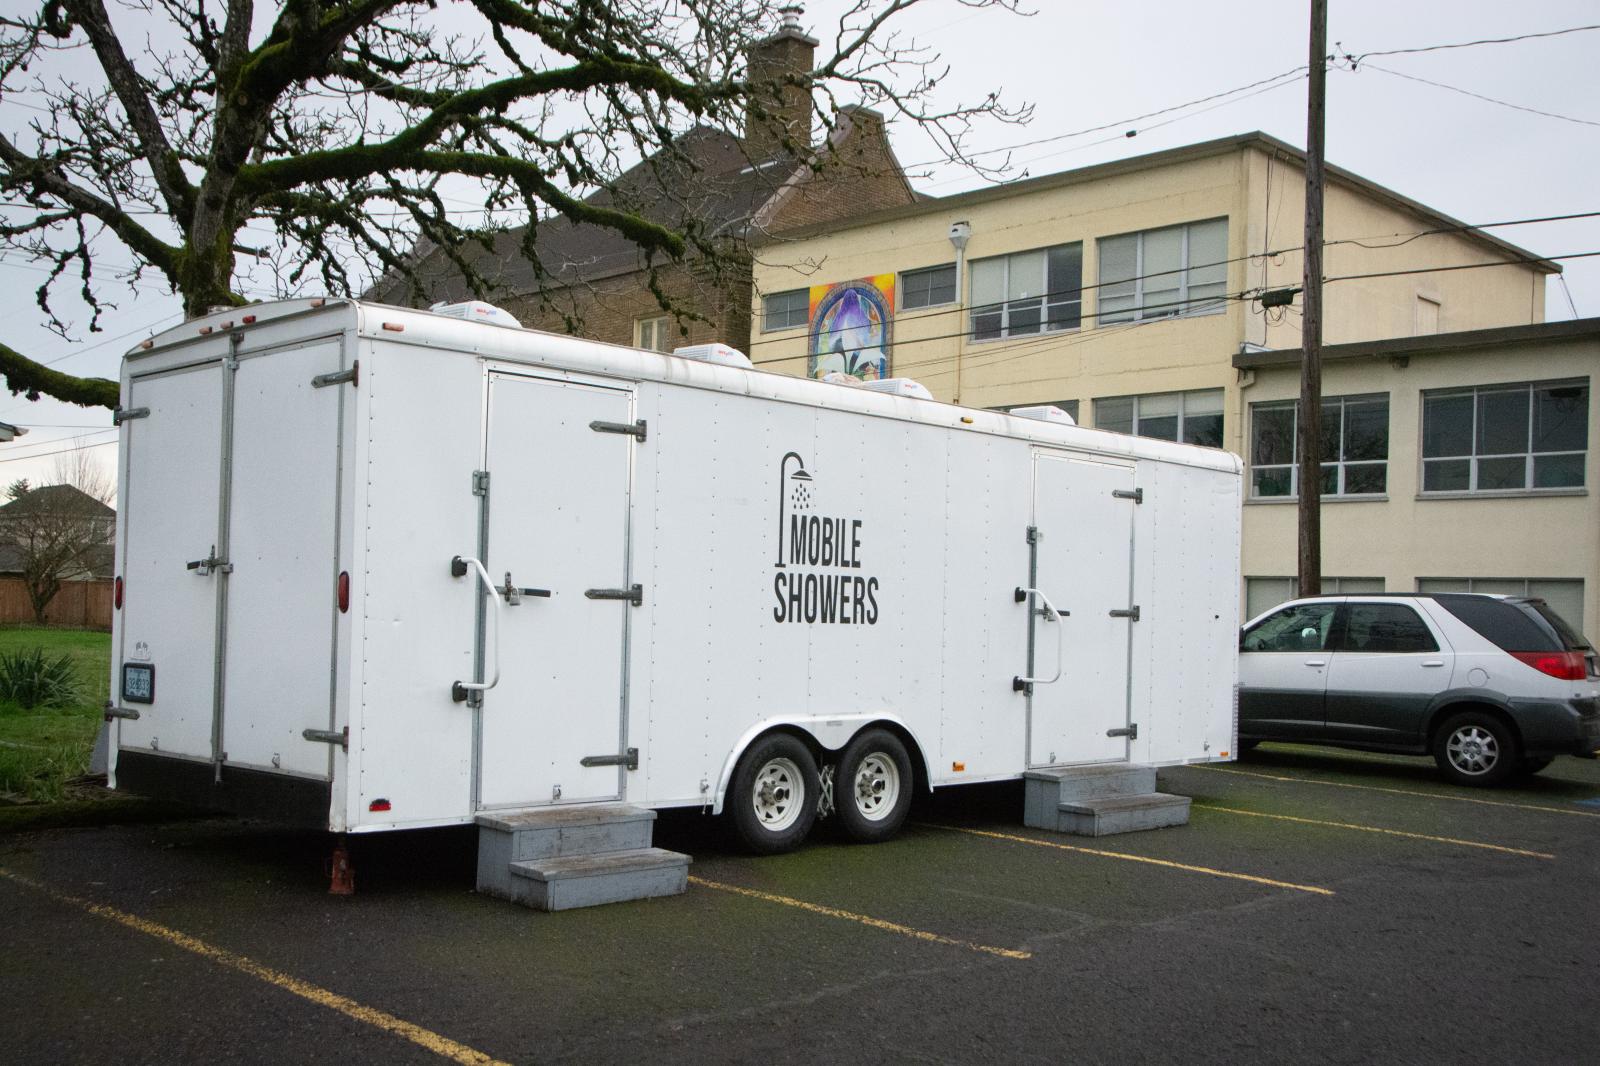 Mobile Showers for Campers at Methodist Church, January 2021